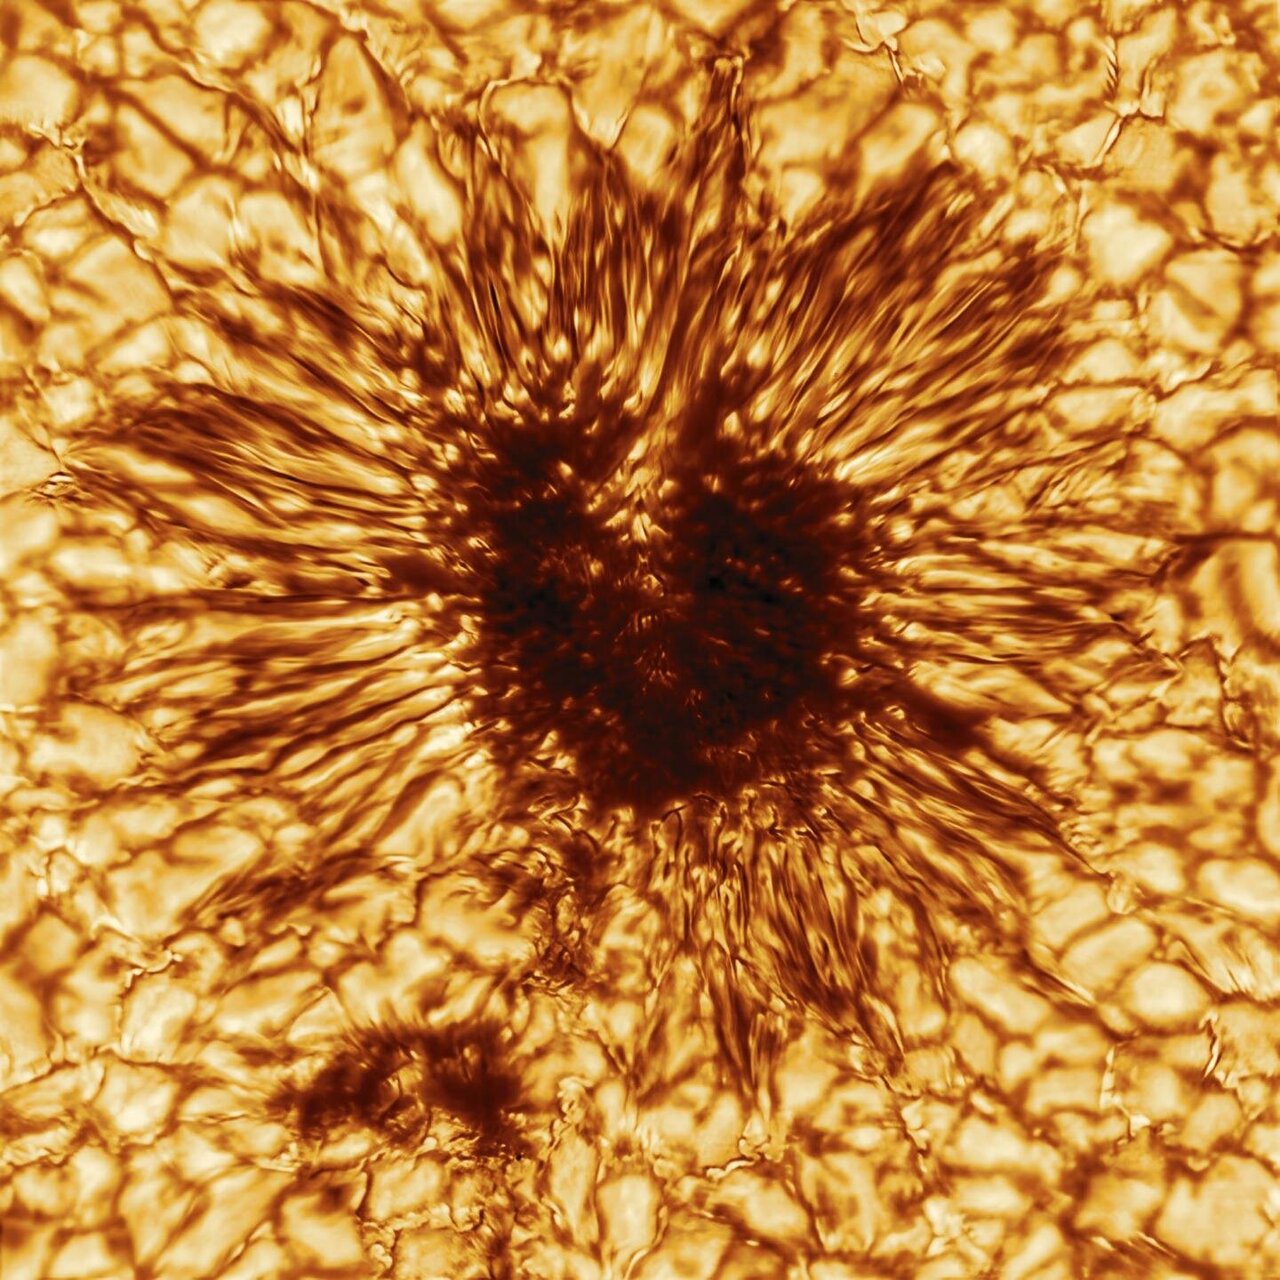 Solar telescope releases first image of a sunspot